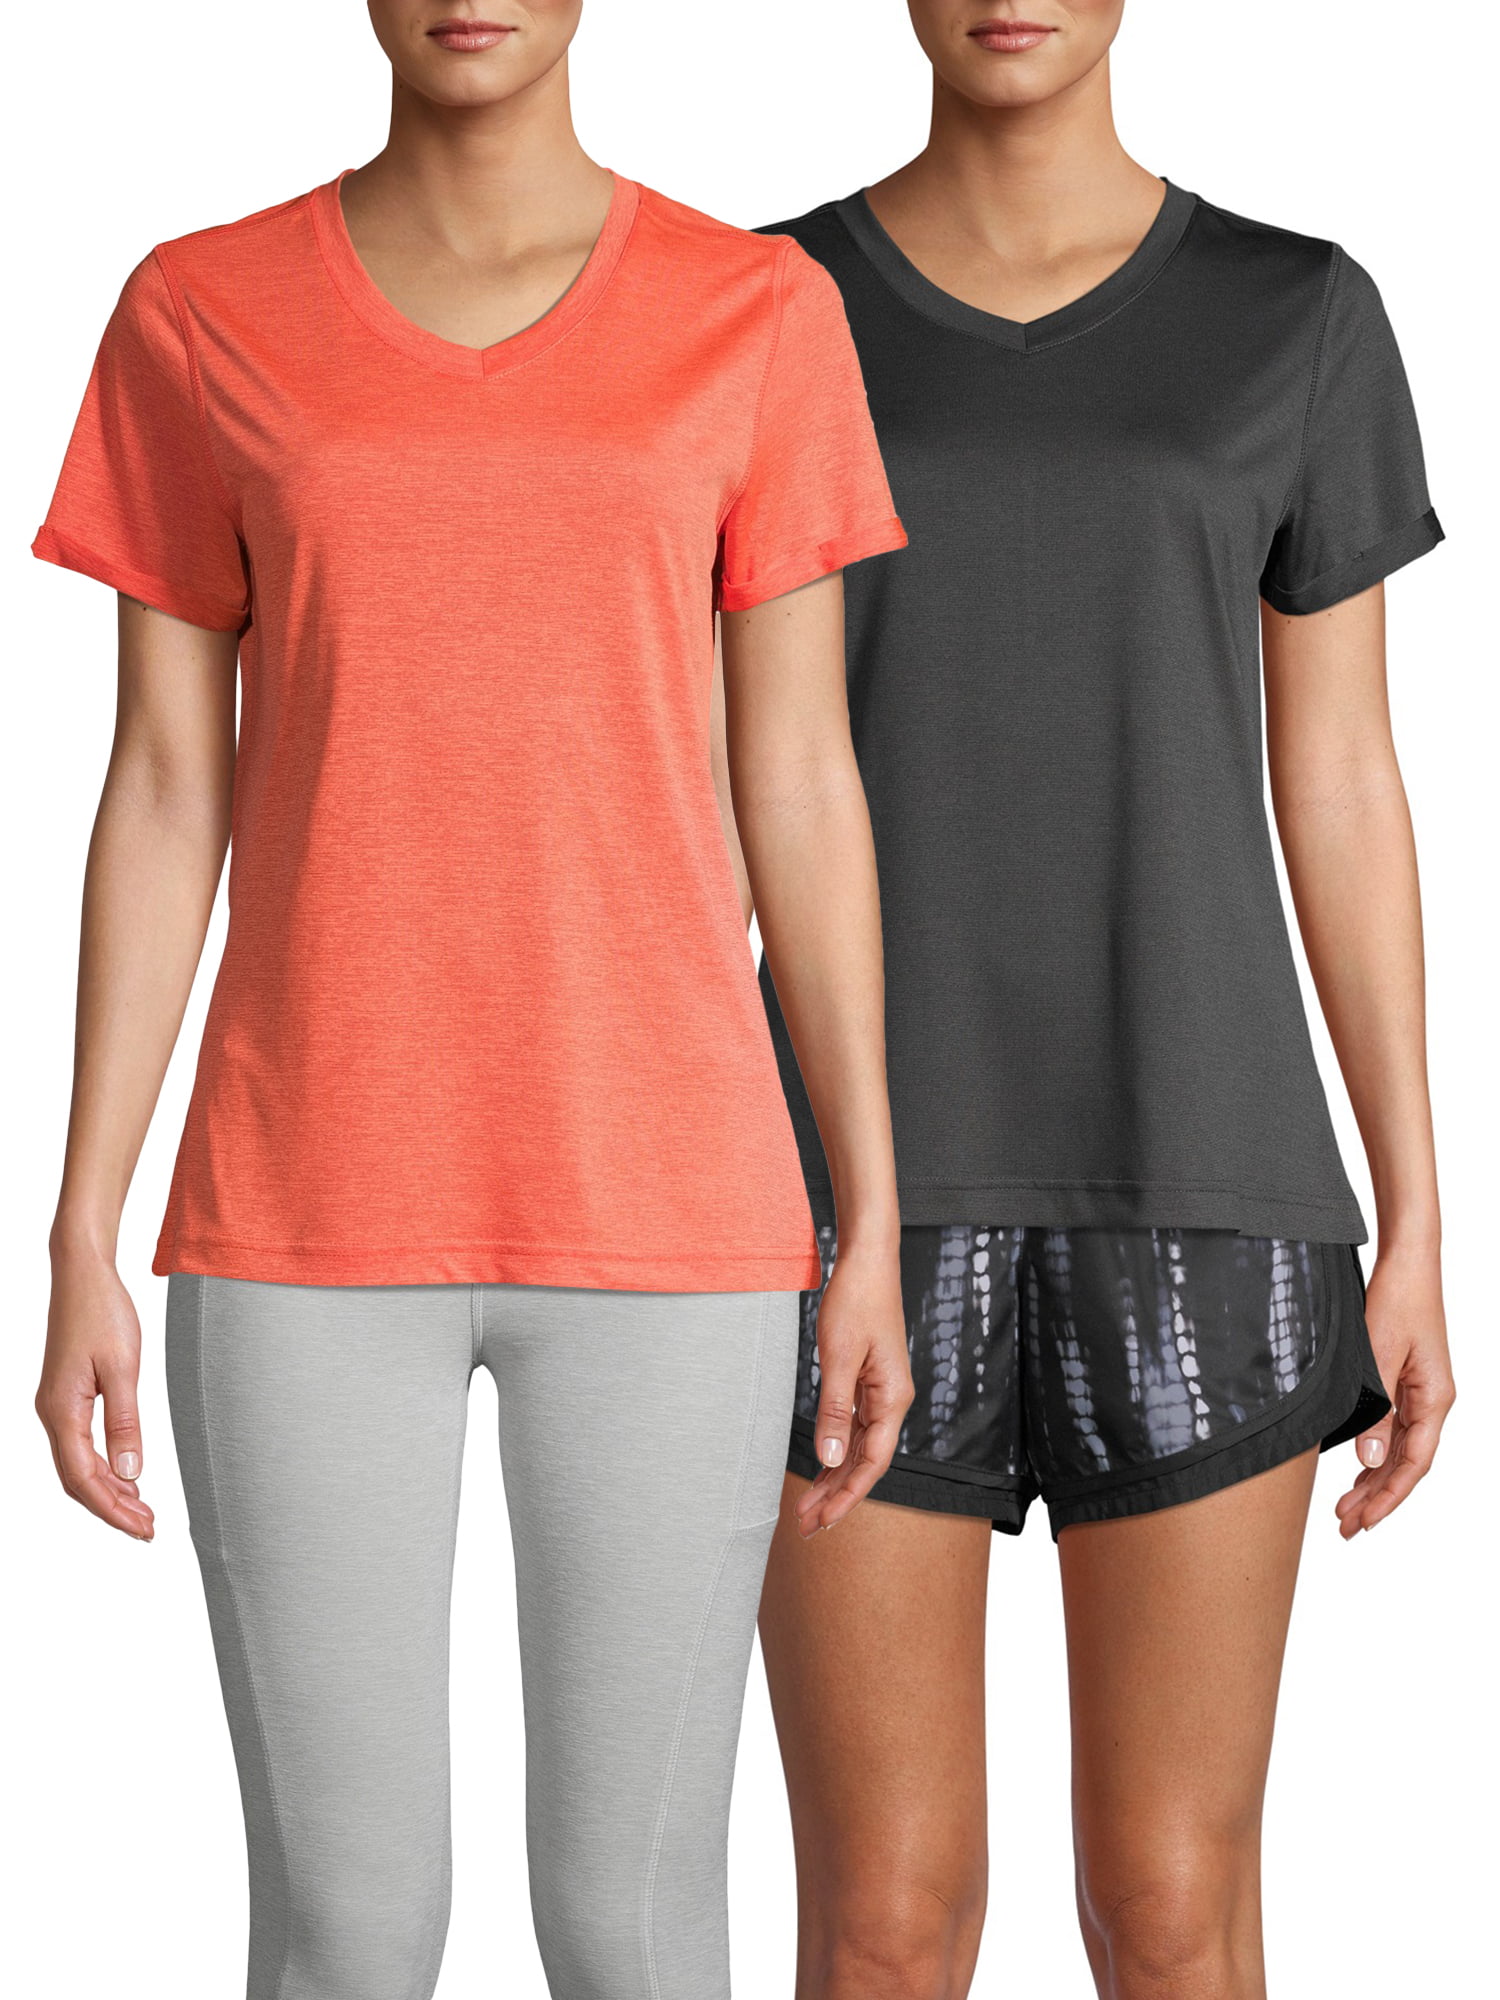 women's athletic t shirts